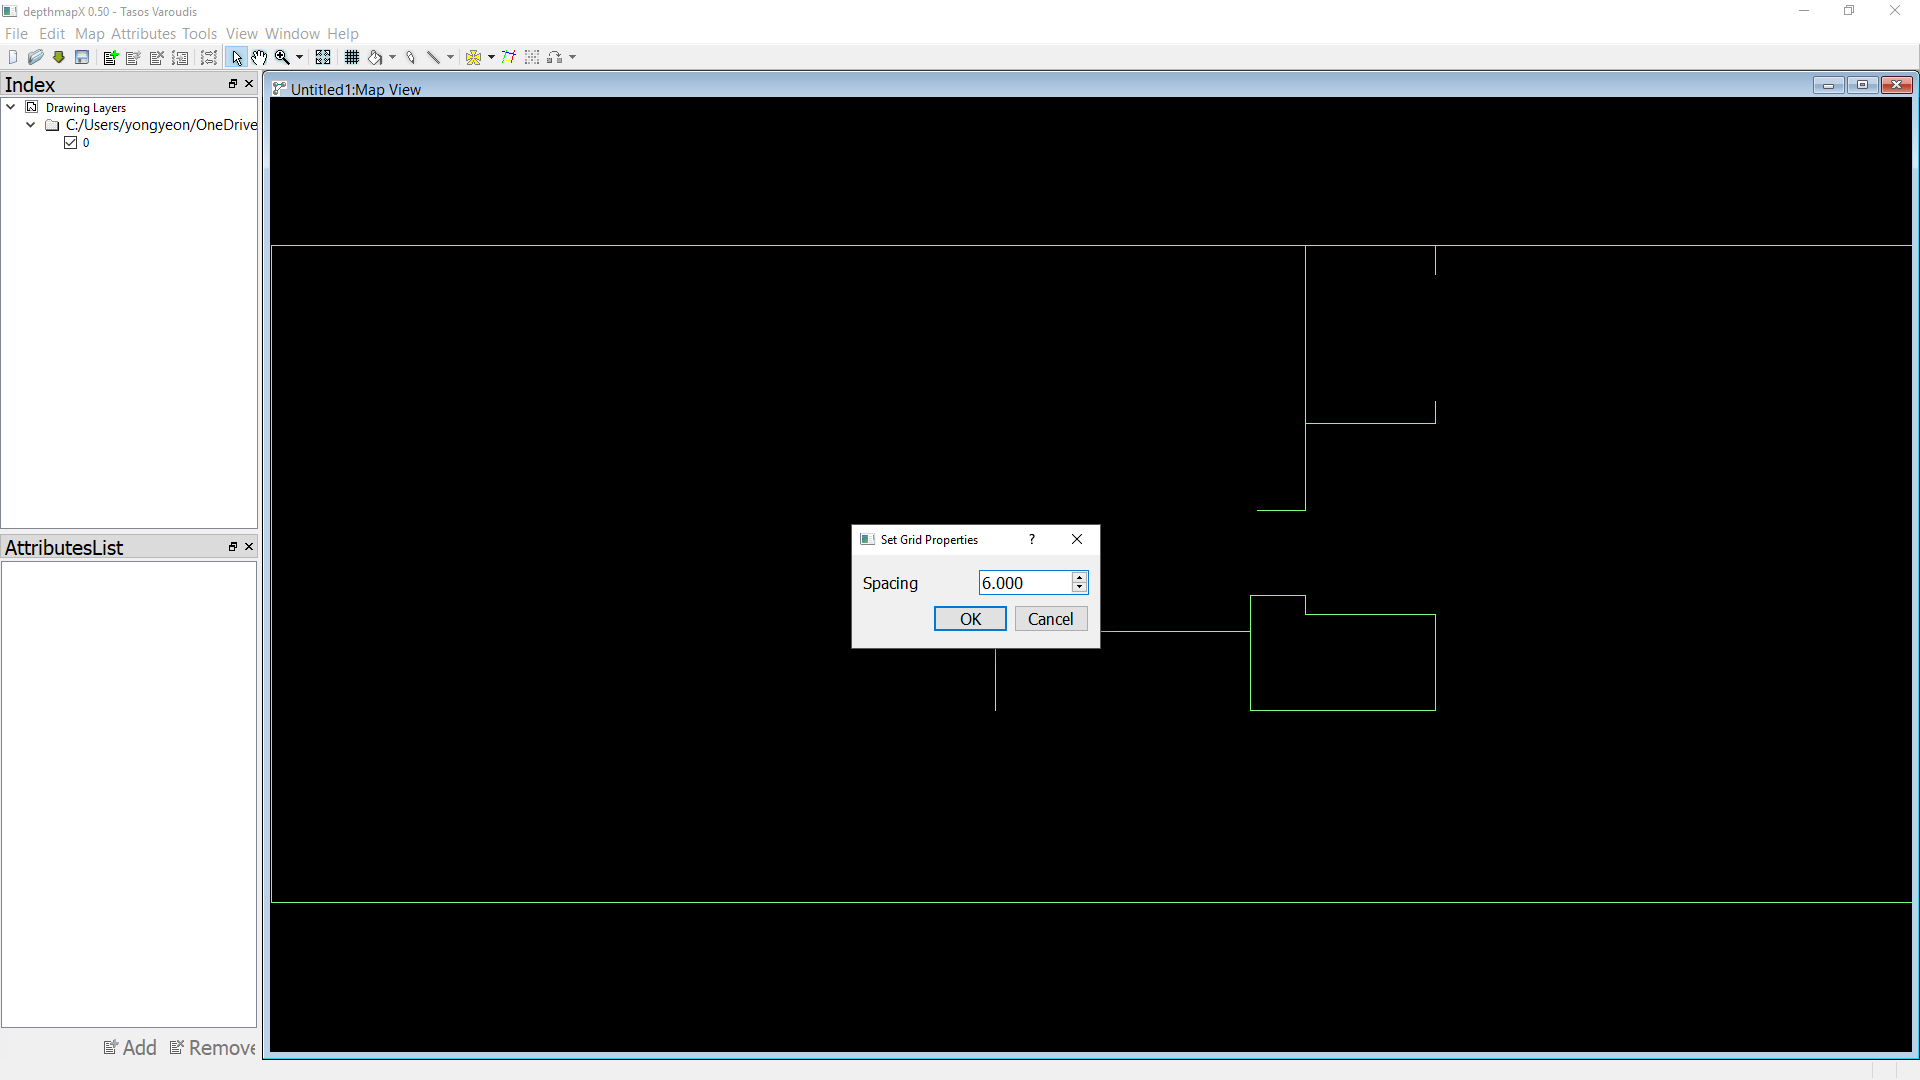 It shows how to add/adjust grids for the visibility graph.